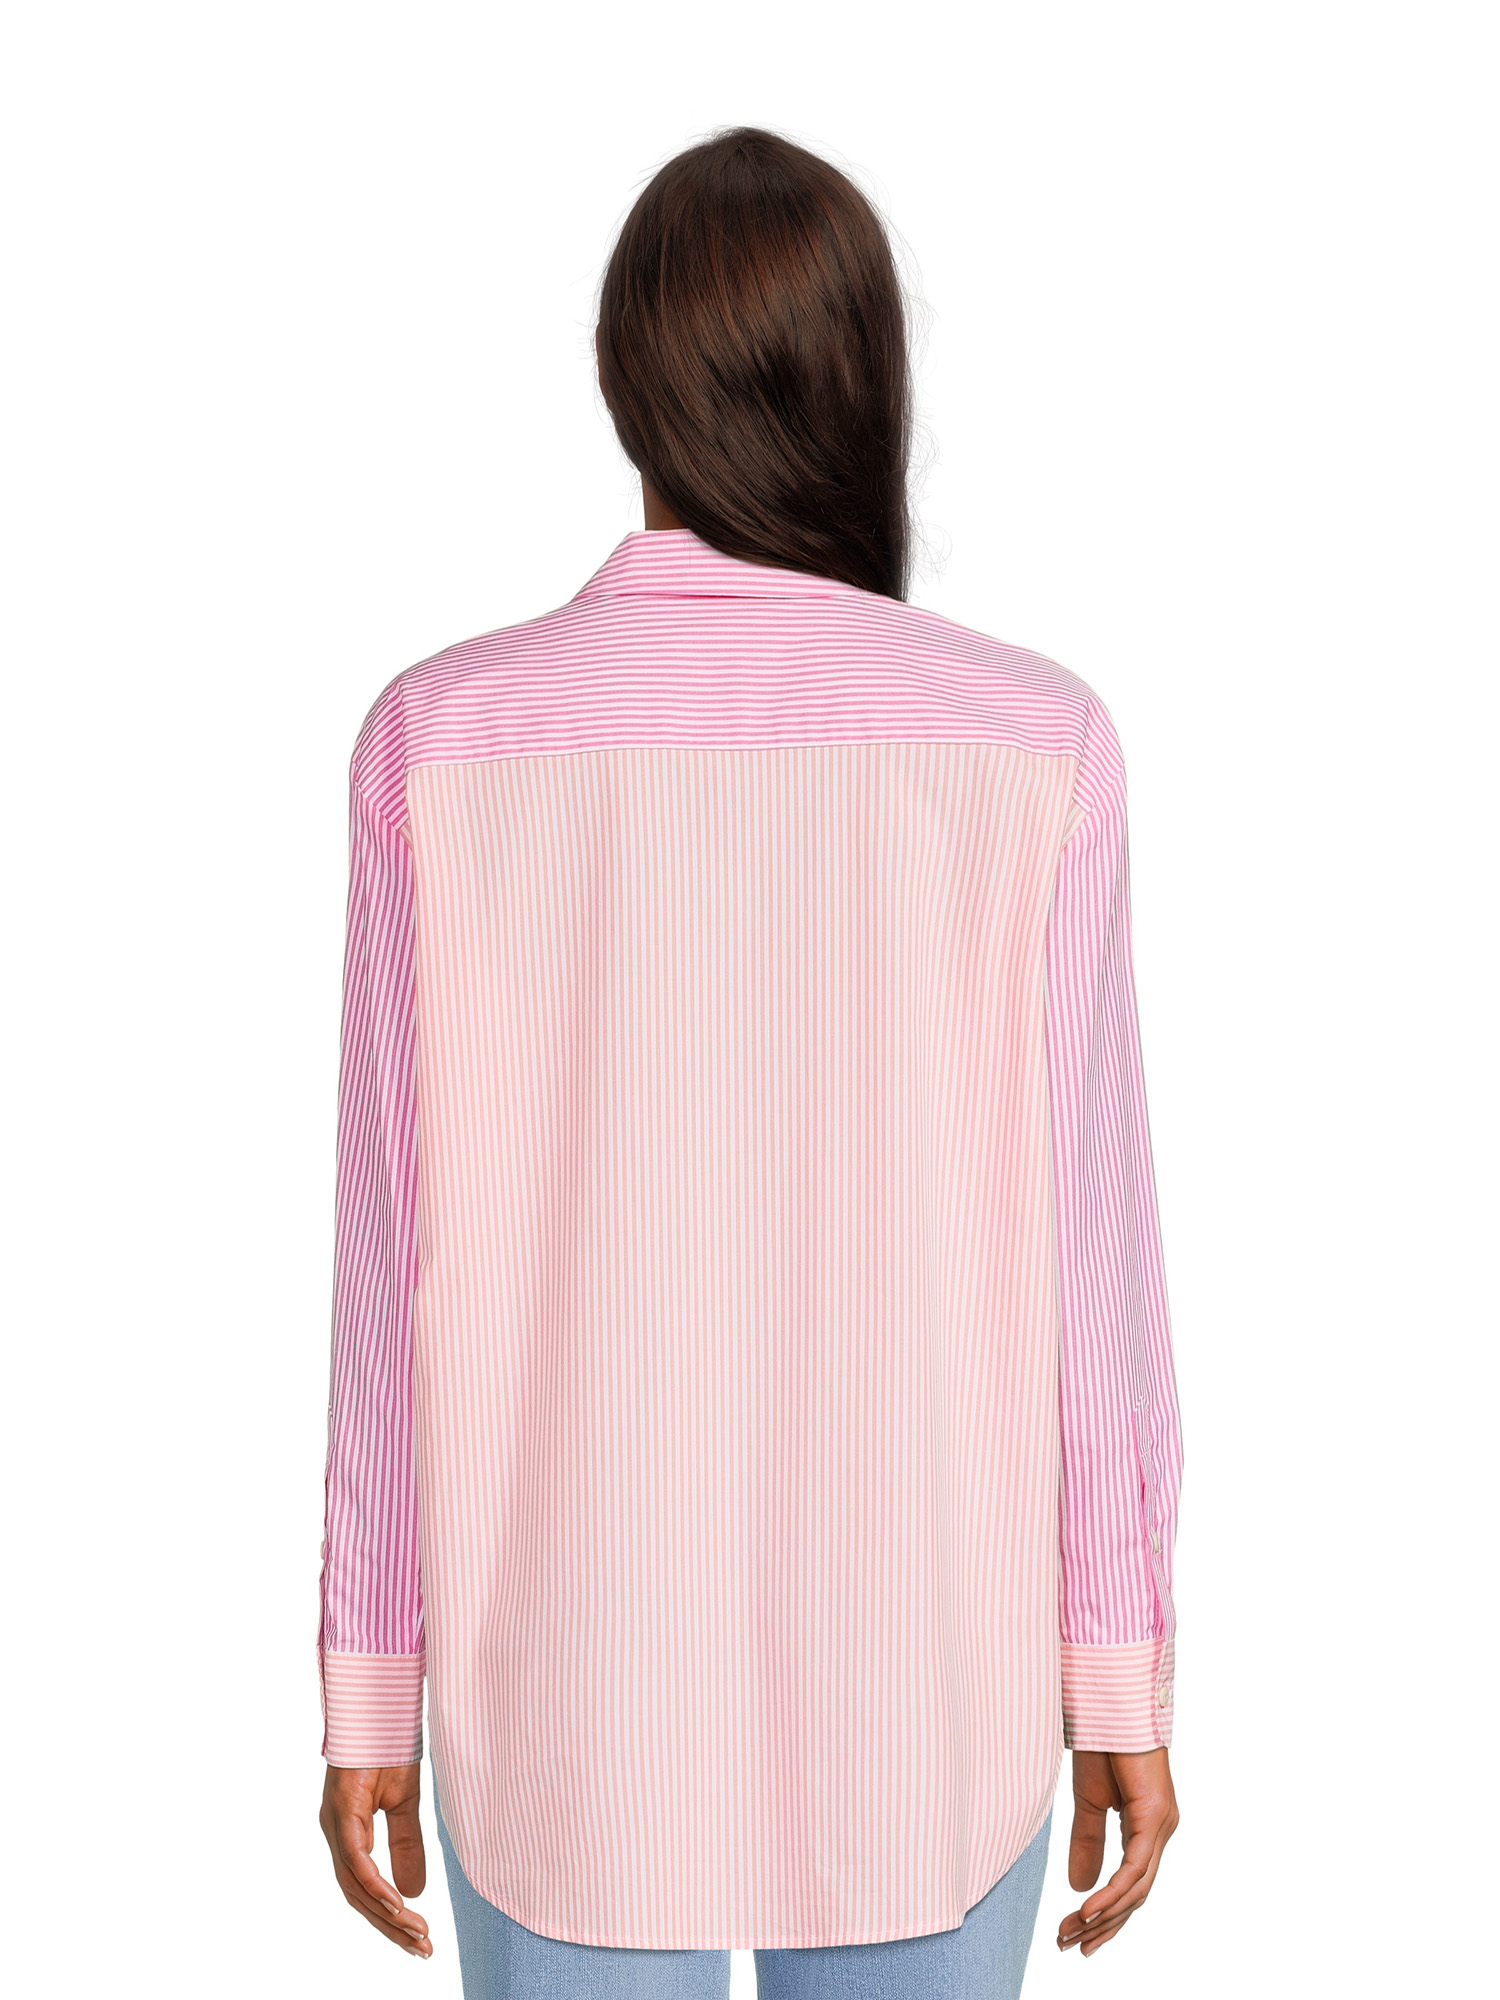 Time and Tru Women's Oversized Button-Down Shirt - image 3 of 5